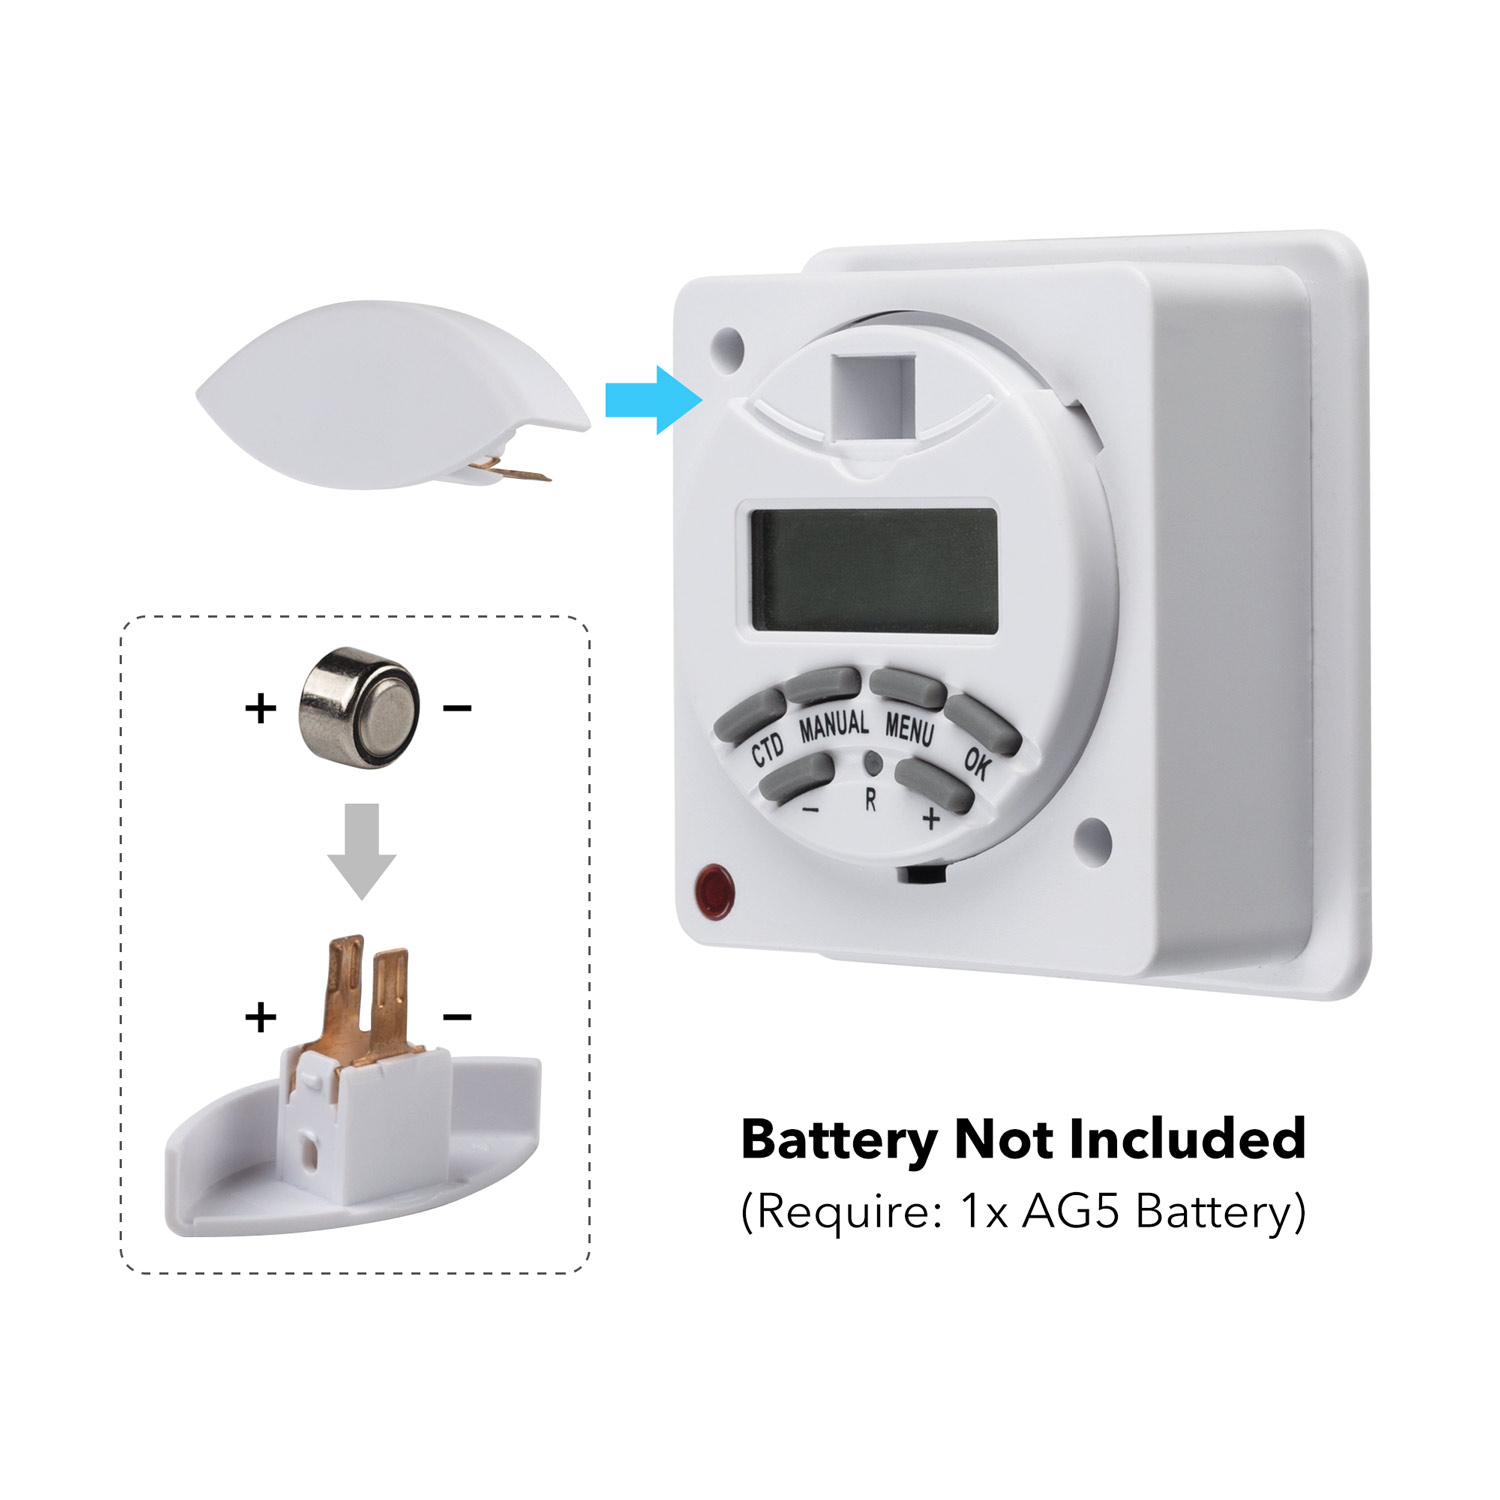 HBN Weekly Programmable Electronic Digital Wall-Mounted Timer Switch with Countdown Function, Waterproof Cover White, 220-240V 16A